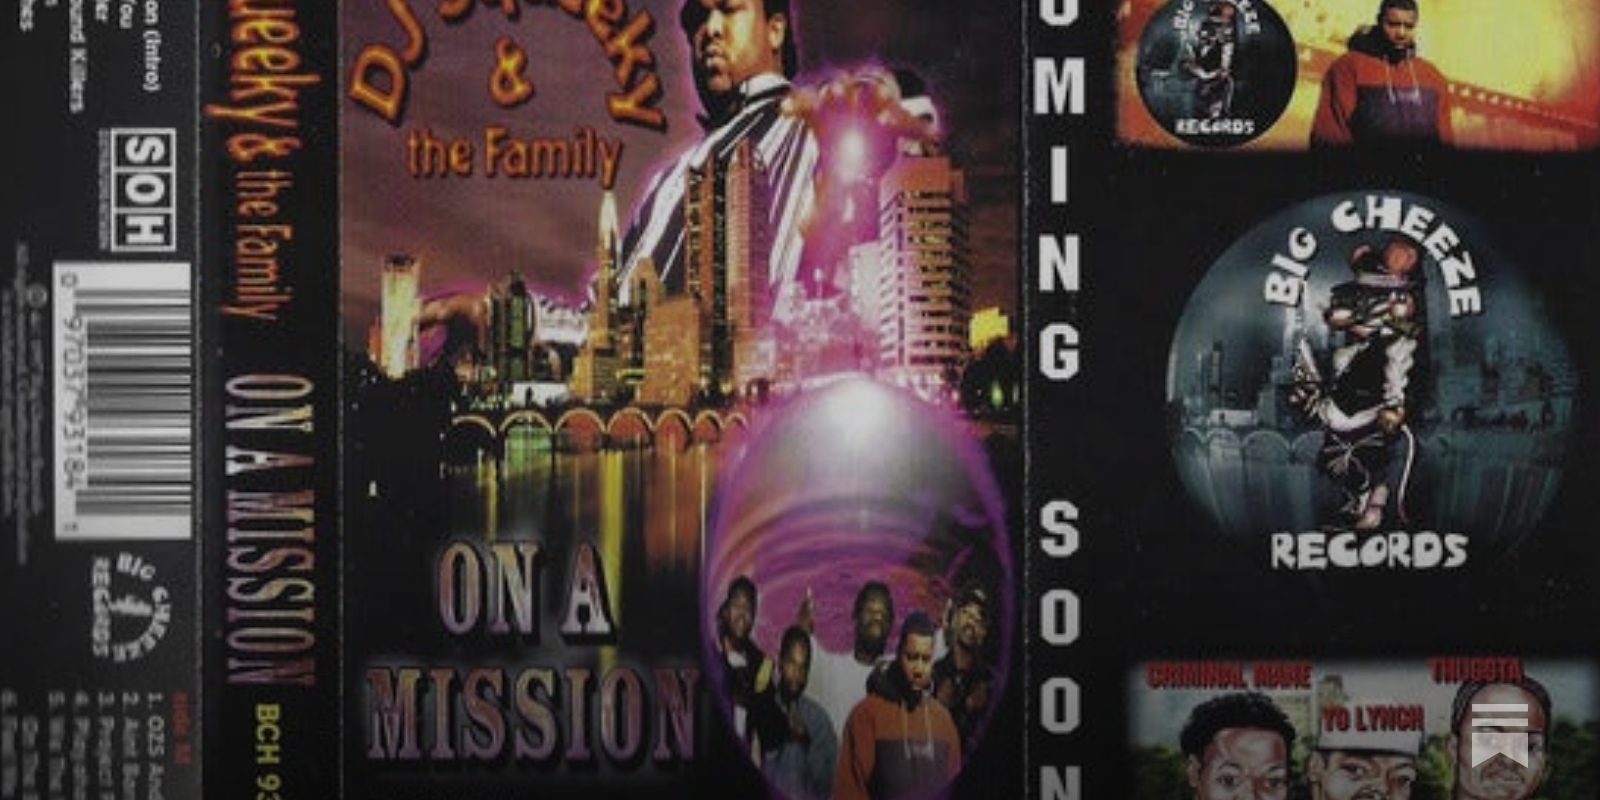 DJ Squeeky Sold 10,000 Copies of 'On A Mission' in One Week